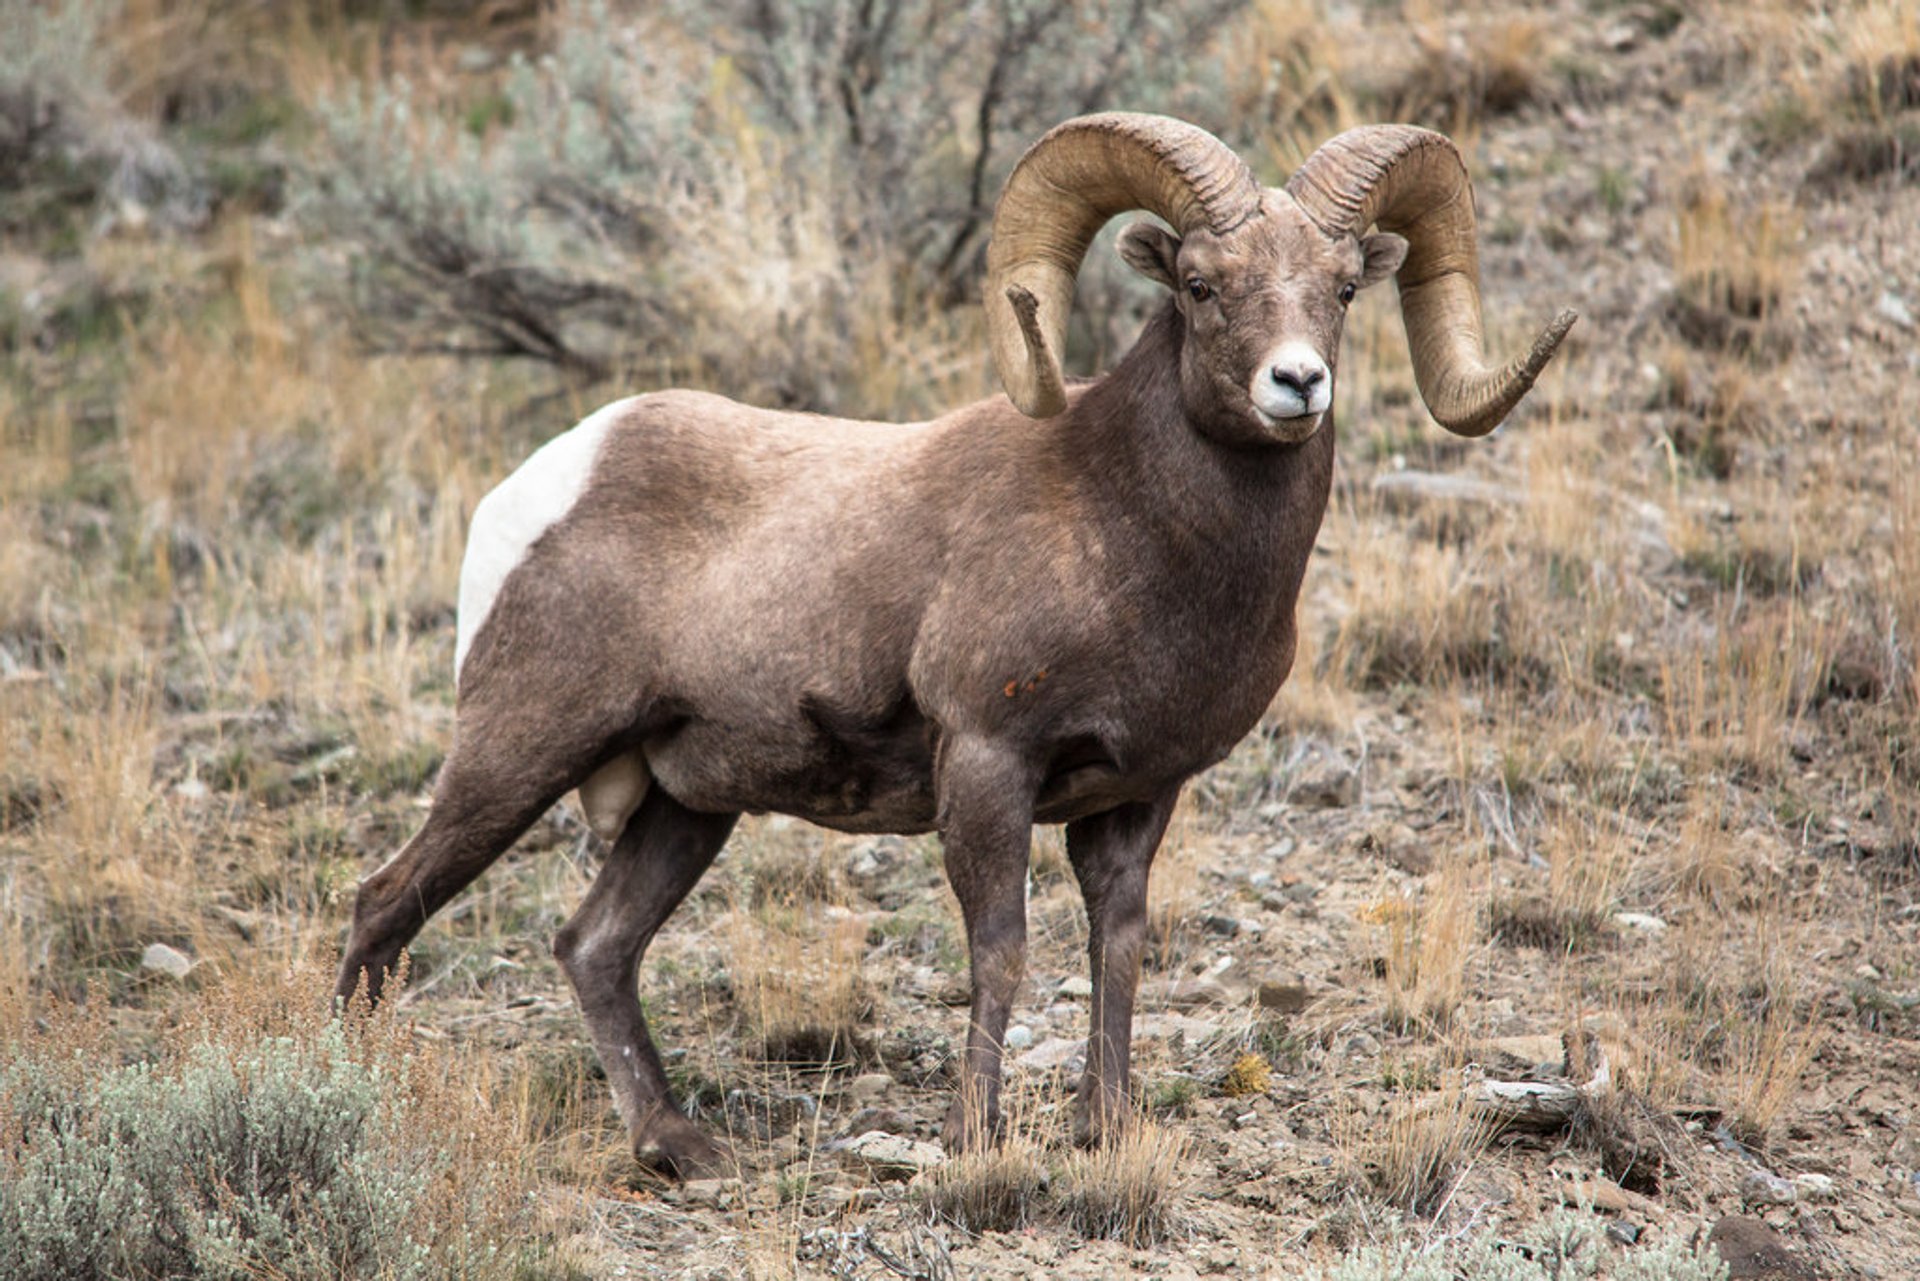 Ask Vail Corporation to protect our Bighorn Sheep population